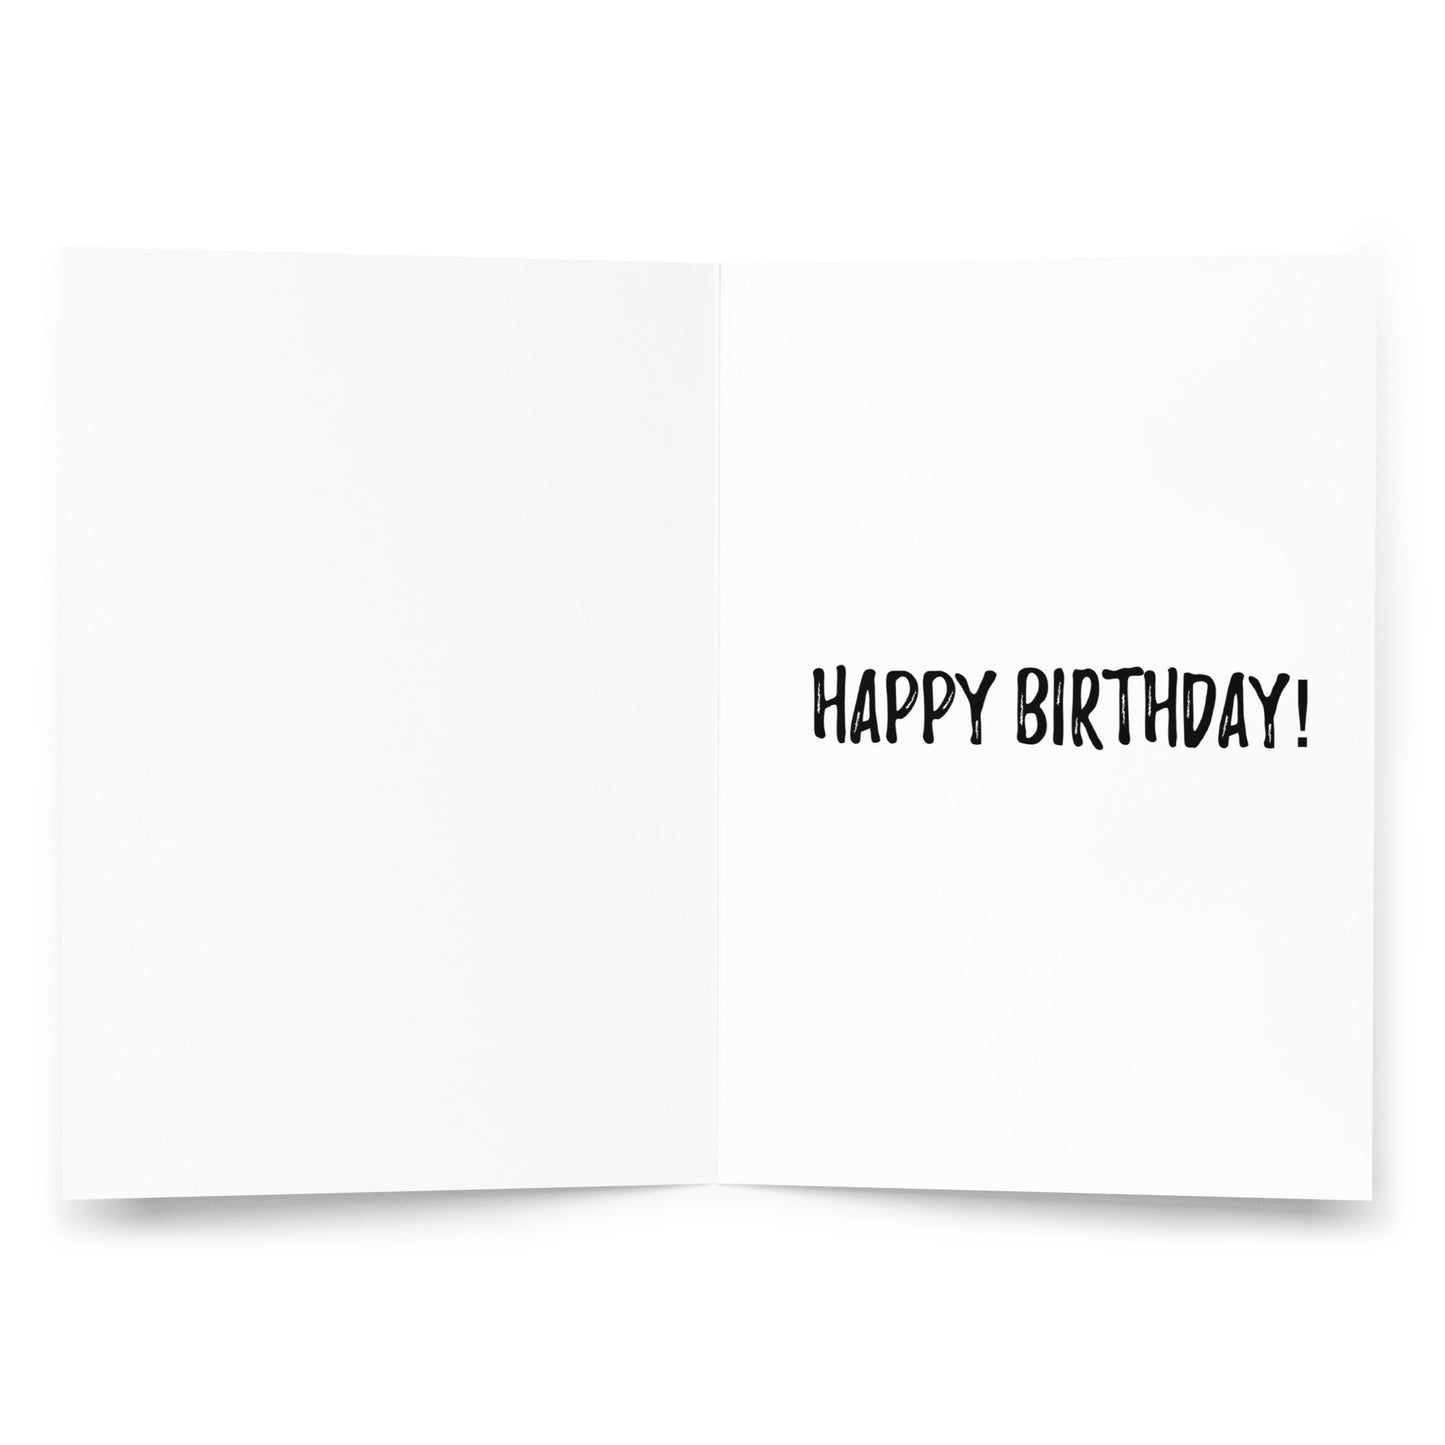 Funny 32nd birthday card | now that's what I call old! A5 card | 32 years old